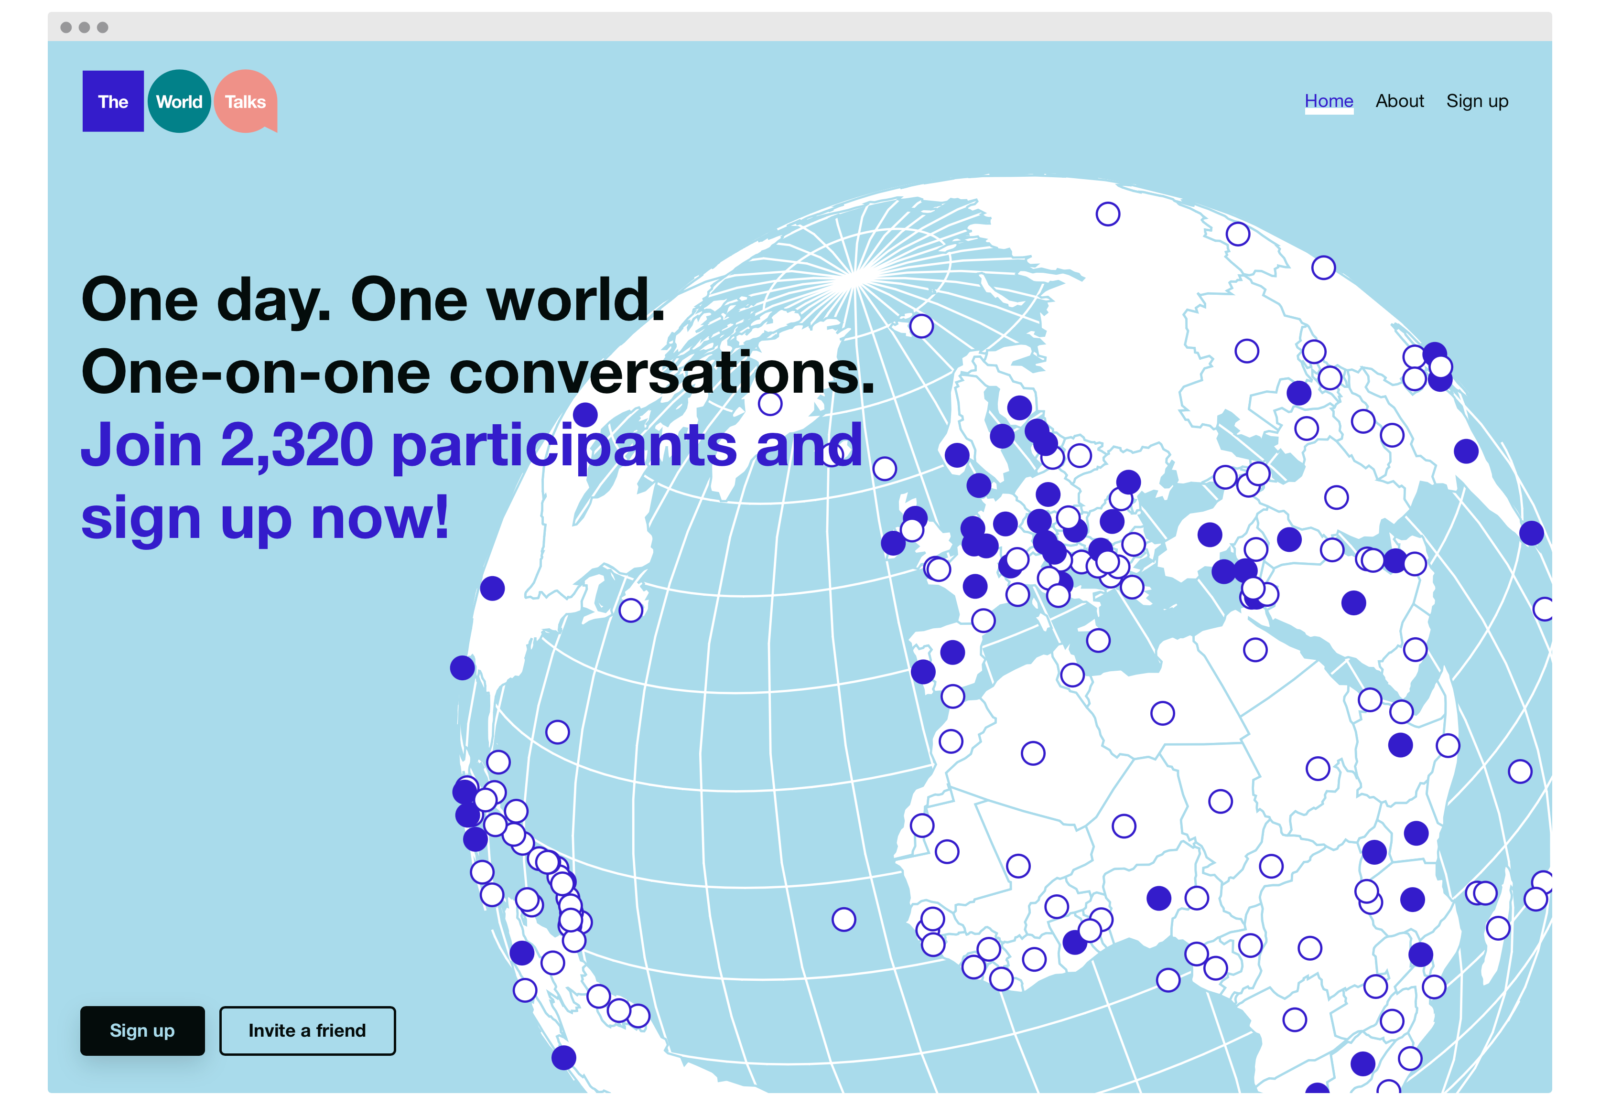 A screenshot of the website for The World Talks, showing a globe with dots for each country, some of them colored in. On top is a headline that reads “One day. One world. One-on-on conversations. Join 2,320 participants and sign up now!”